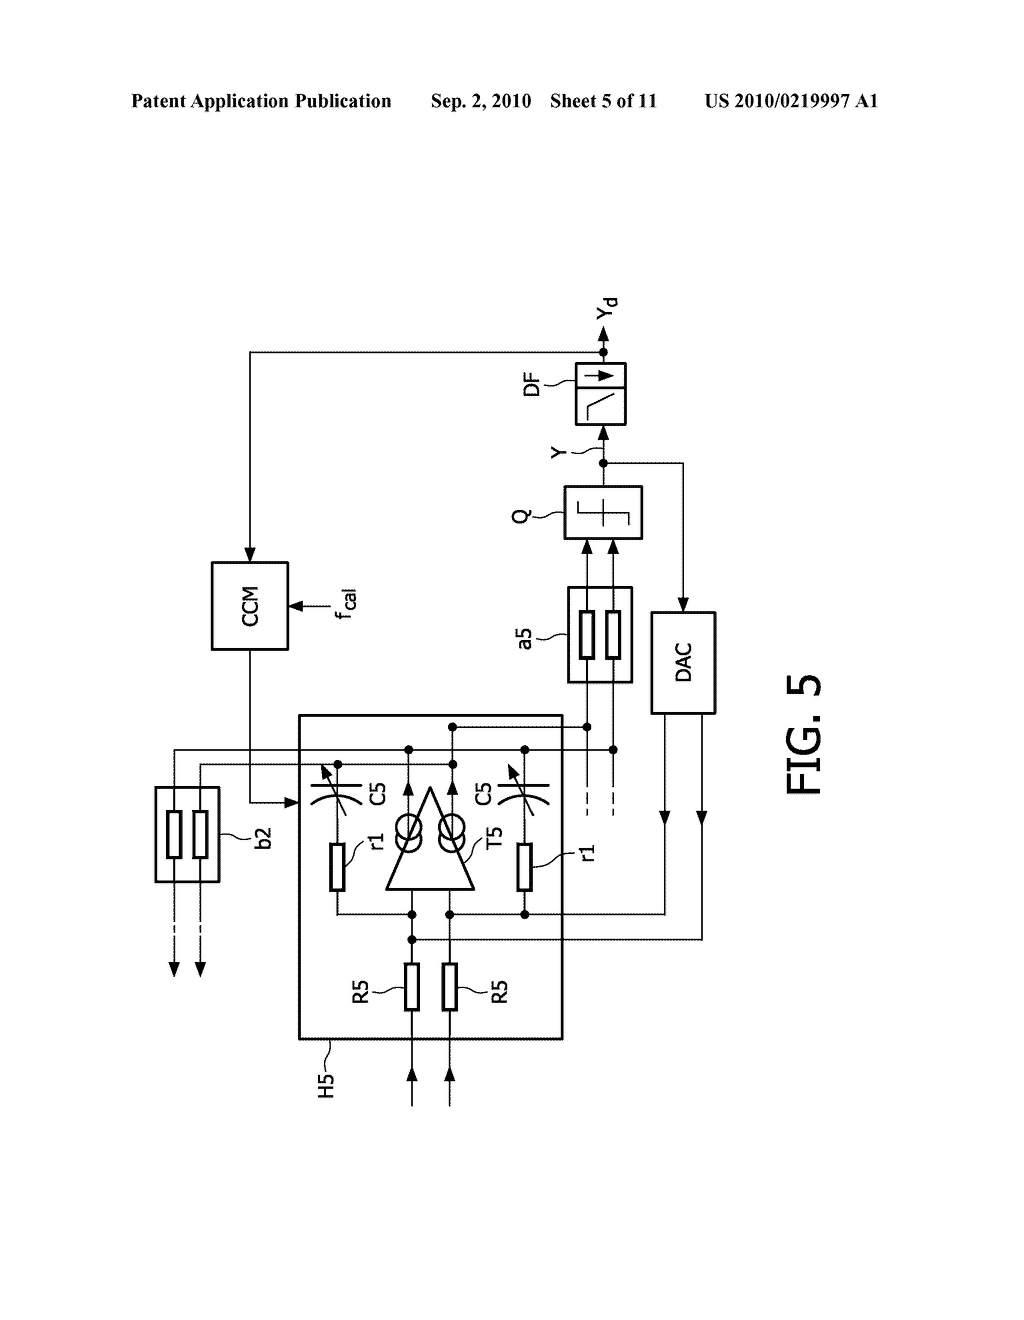 CONTINUOUS-TIME SIGMA-DELTA ANALOG-TO-DIGITAL CONVERTER WITH CAPACITOR AND/OR RESISTANCE DIGITAL SELF-CALIBRATION MEANS FOR RC SPREAD COMPENSATION - diagram, schematic, and image 06